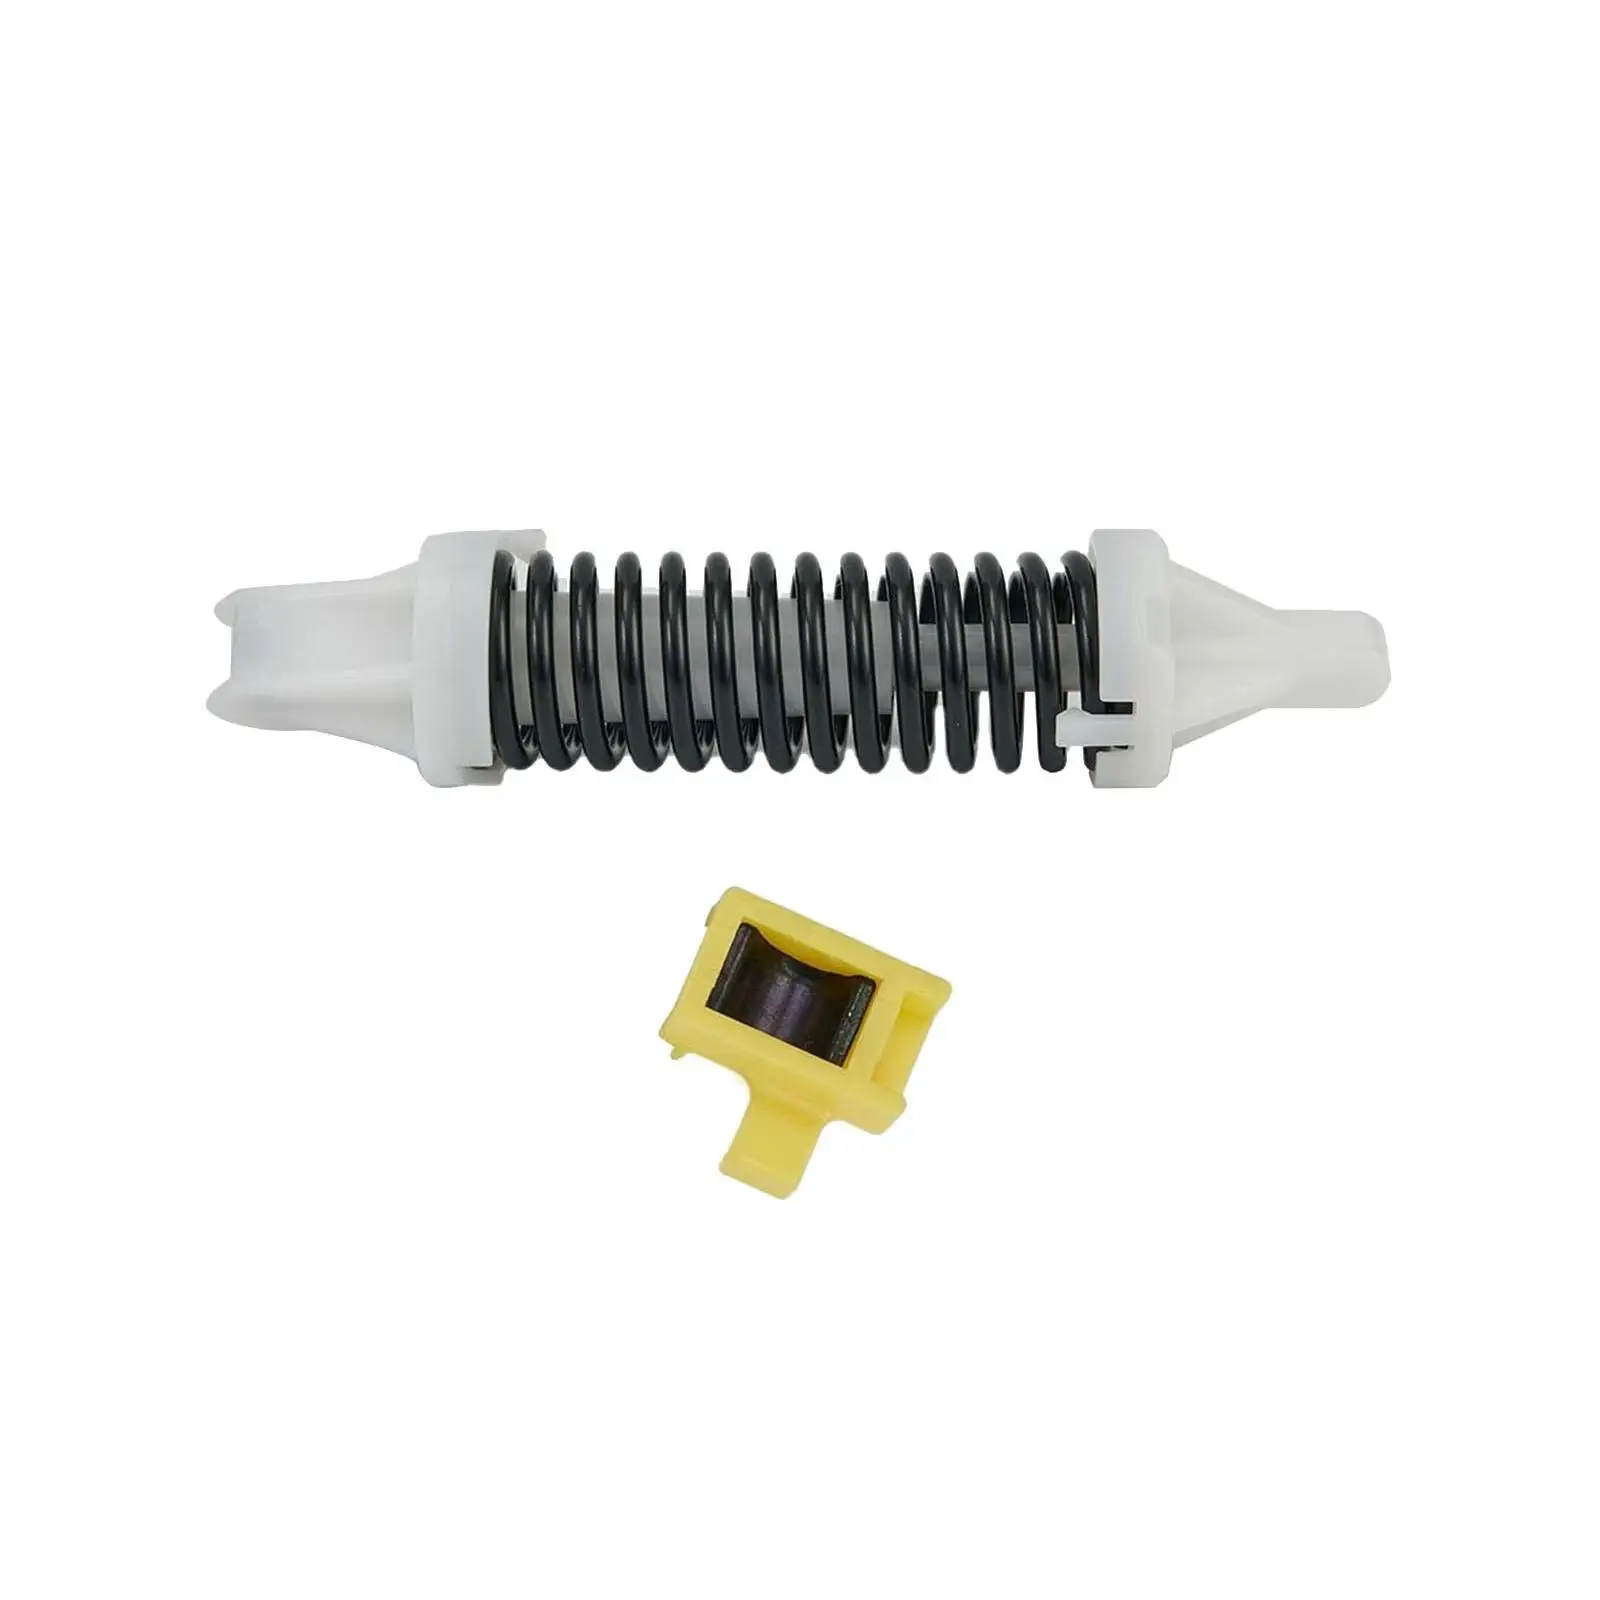 Clutch Pedal Return Spring 9191365 for Vauxhall Opel Vectra C 2002-2009